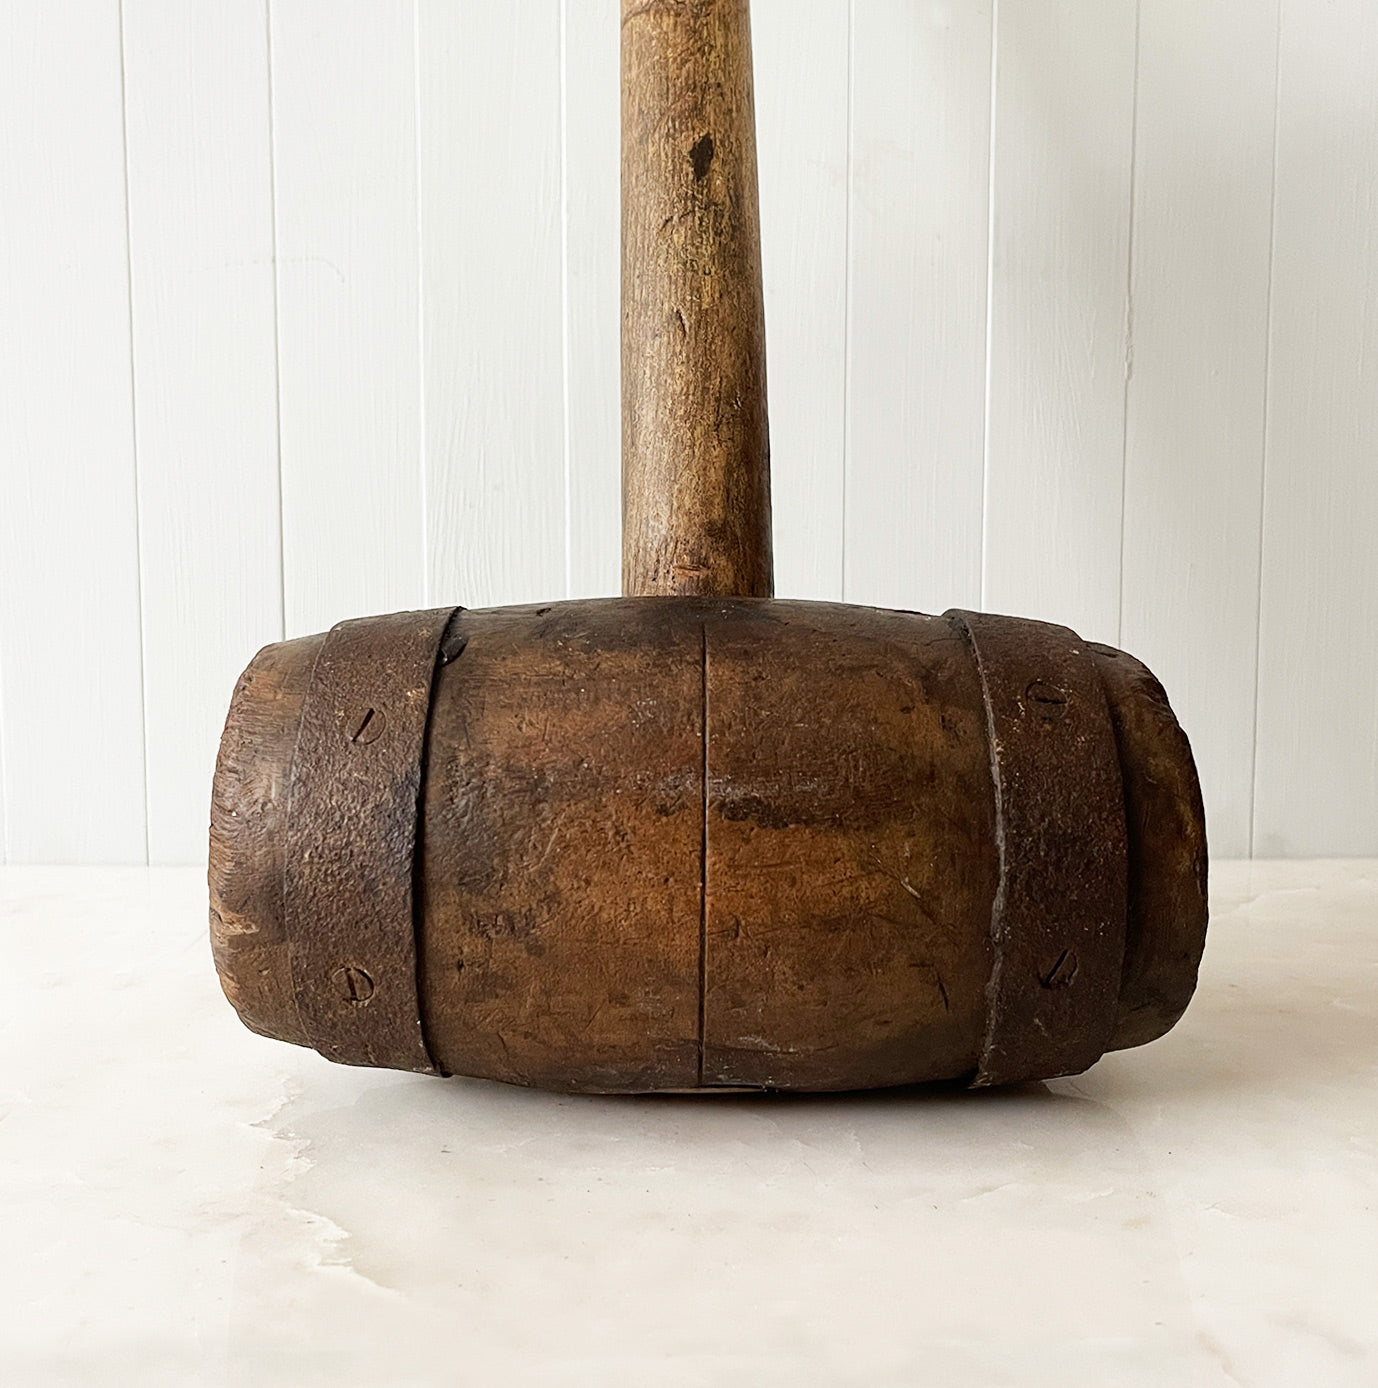 A Large Antique Mallet. It has two metal riveted straps at each end with a sturdy hickory handle. With fantastic age and wear to it, this mallet would have been used in either a circus or fairground to whack the tent spikes in - SHOP NOW - www.intovintage.co.uk